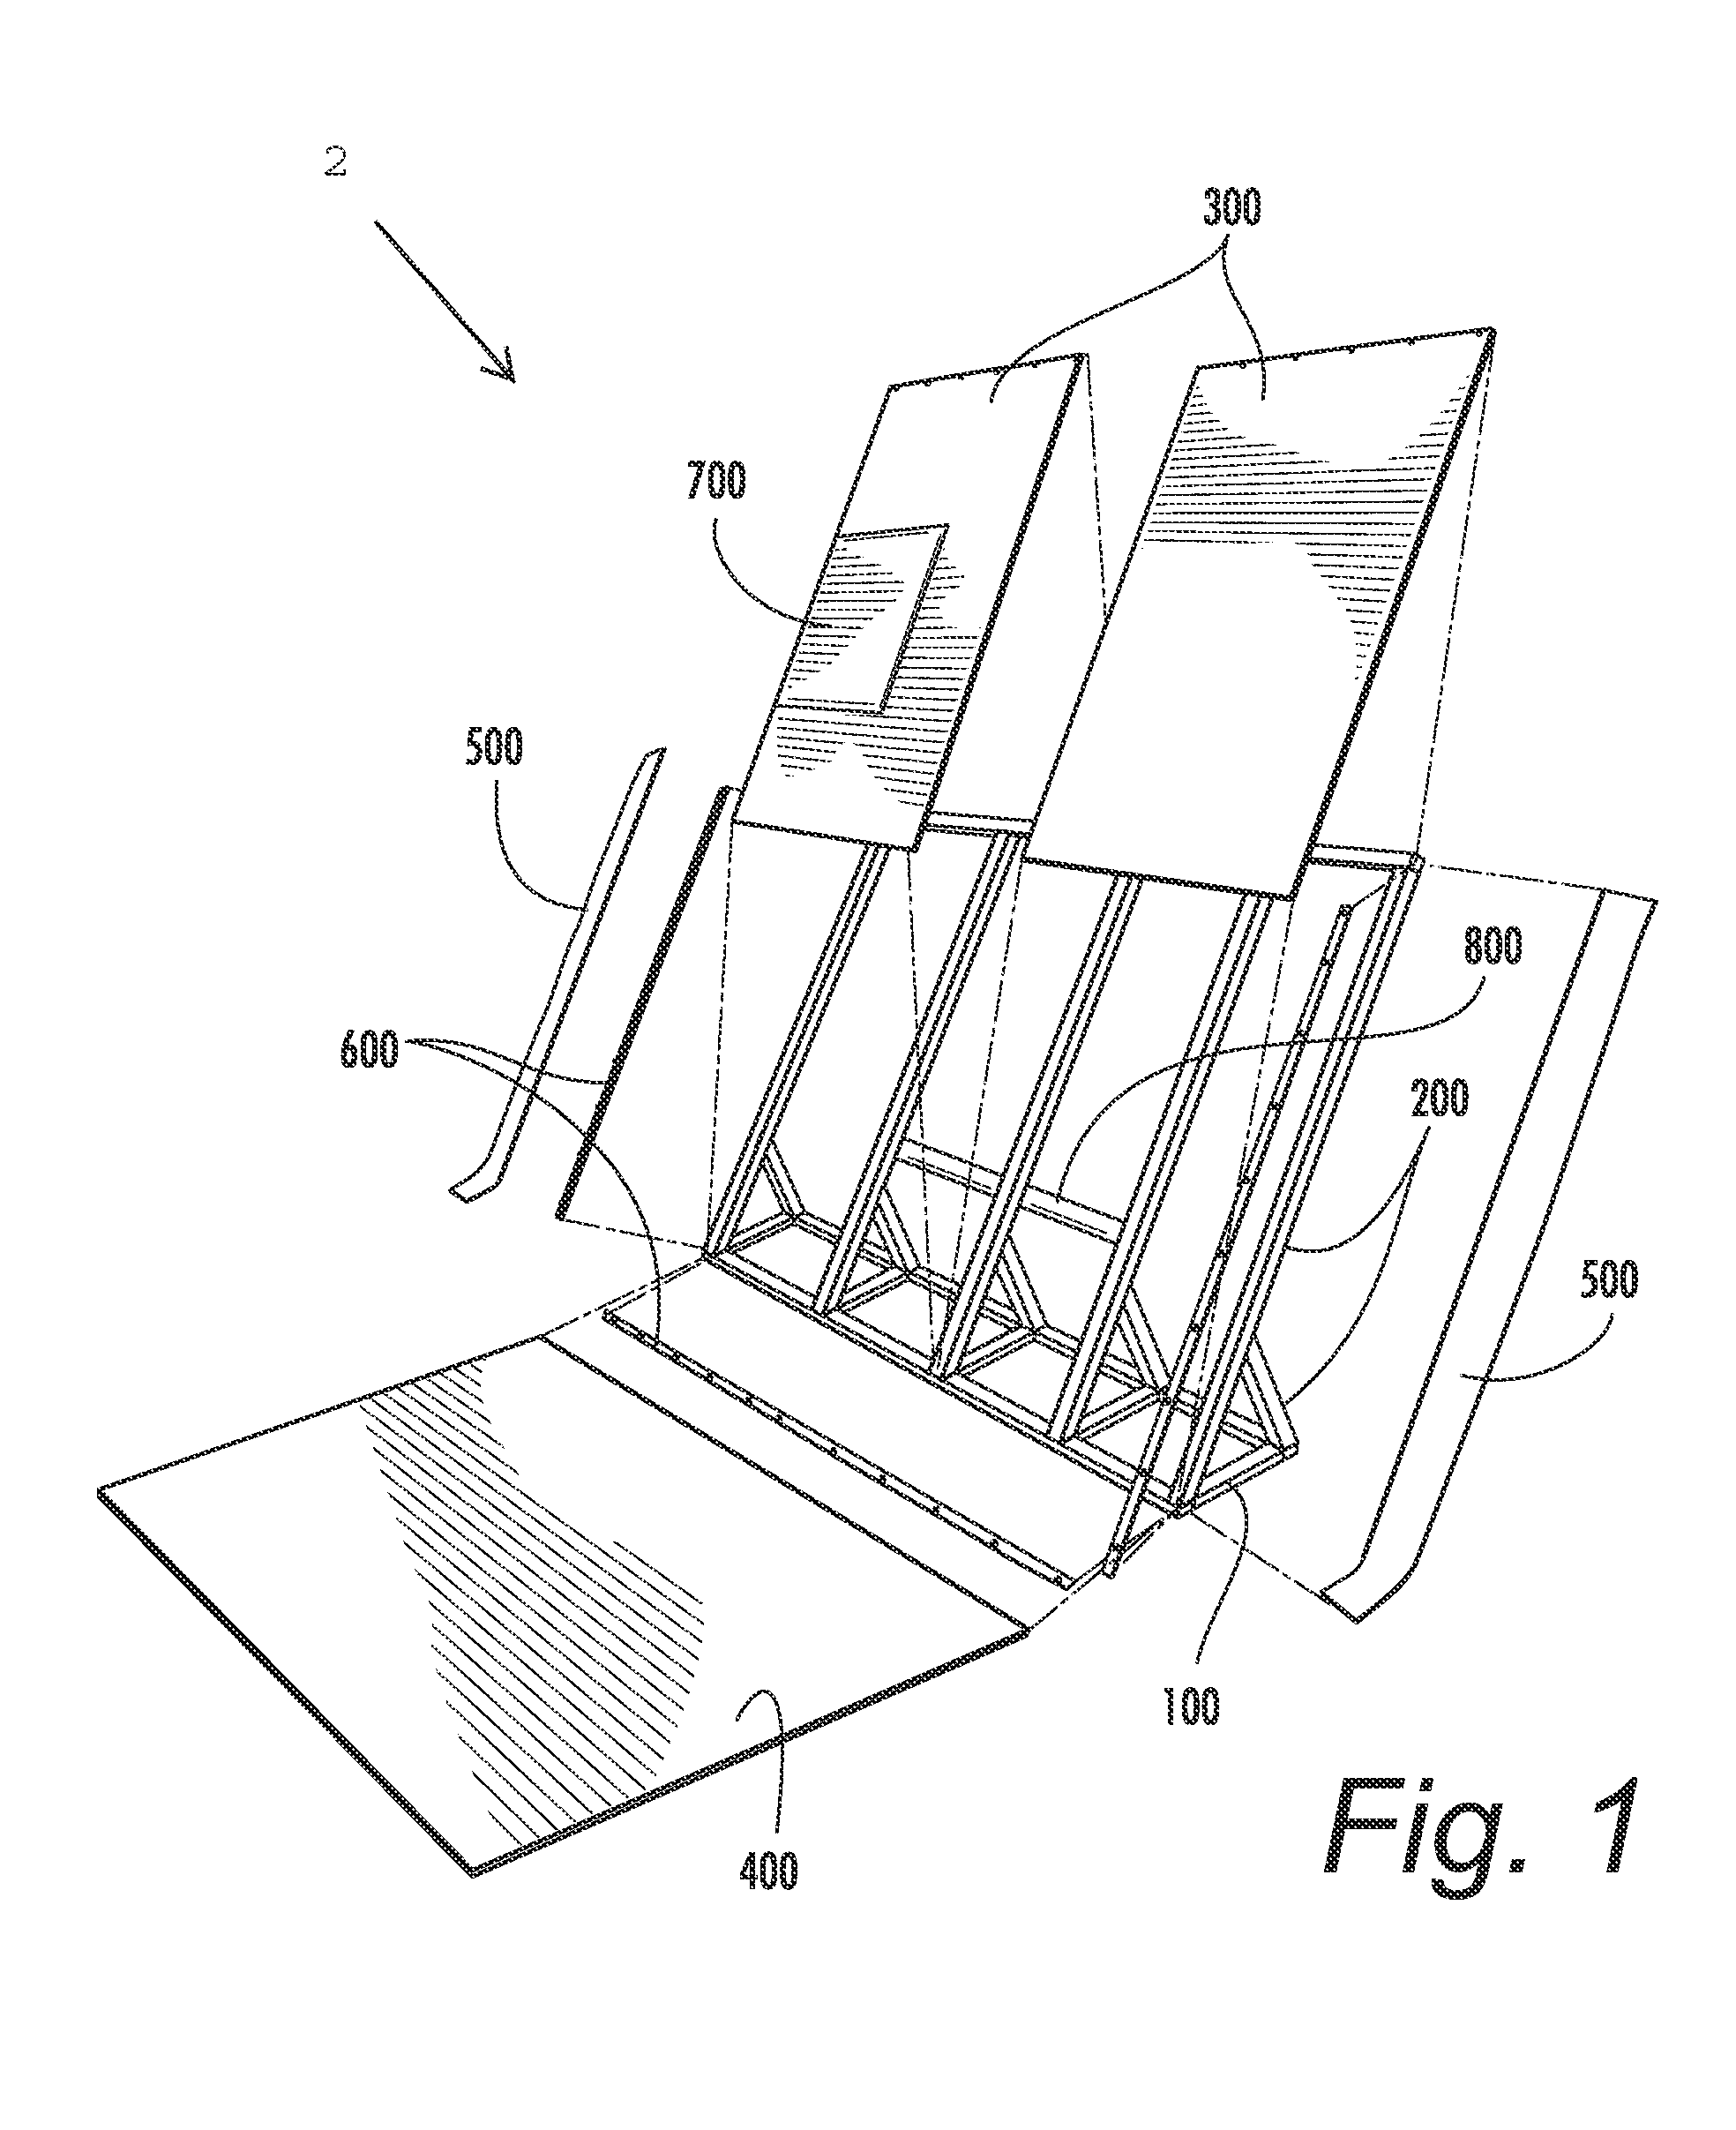 Moving headboard trailer ejector and floor cleaning apparatus